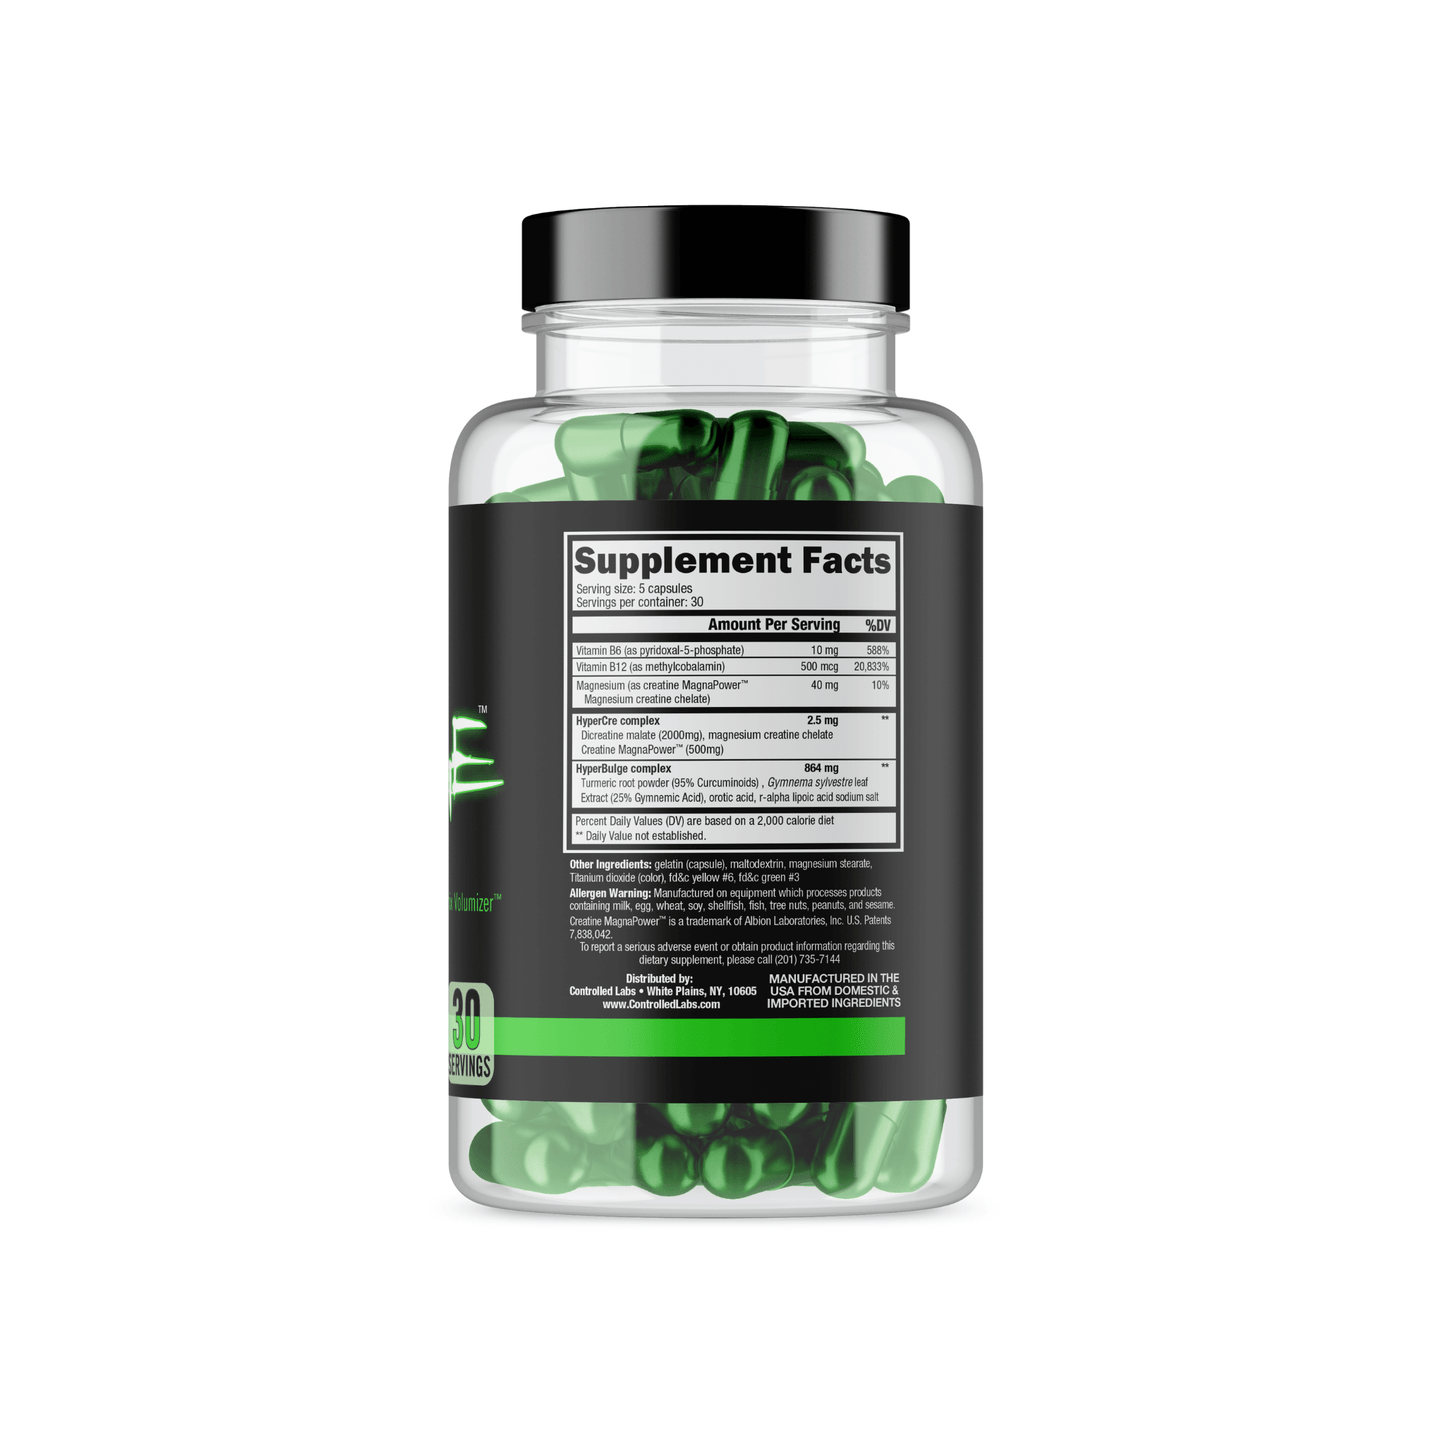 Green Bulge Supplement Facts